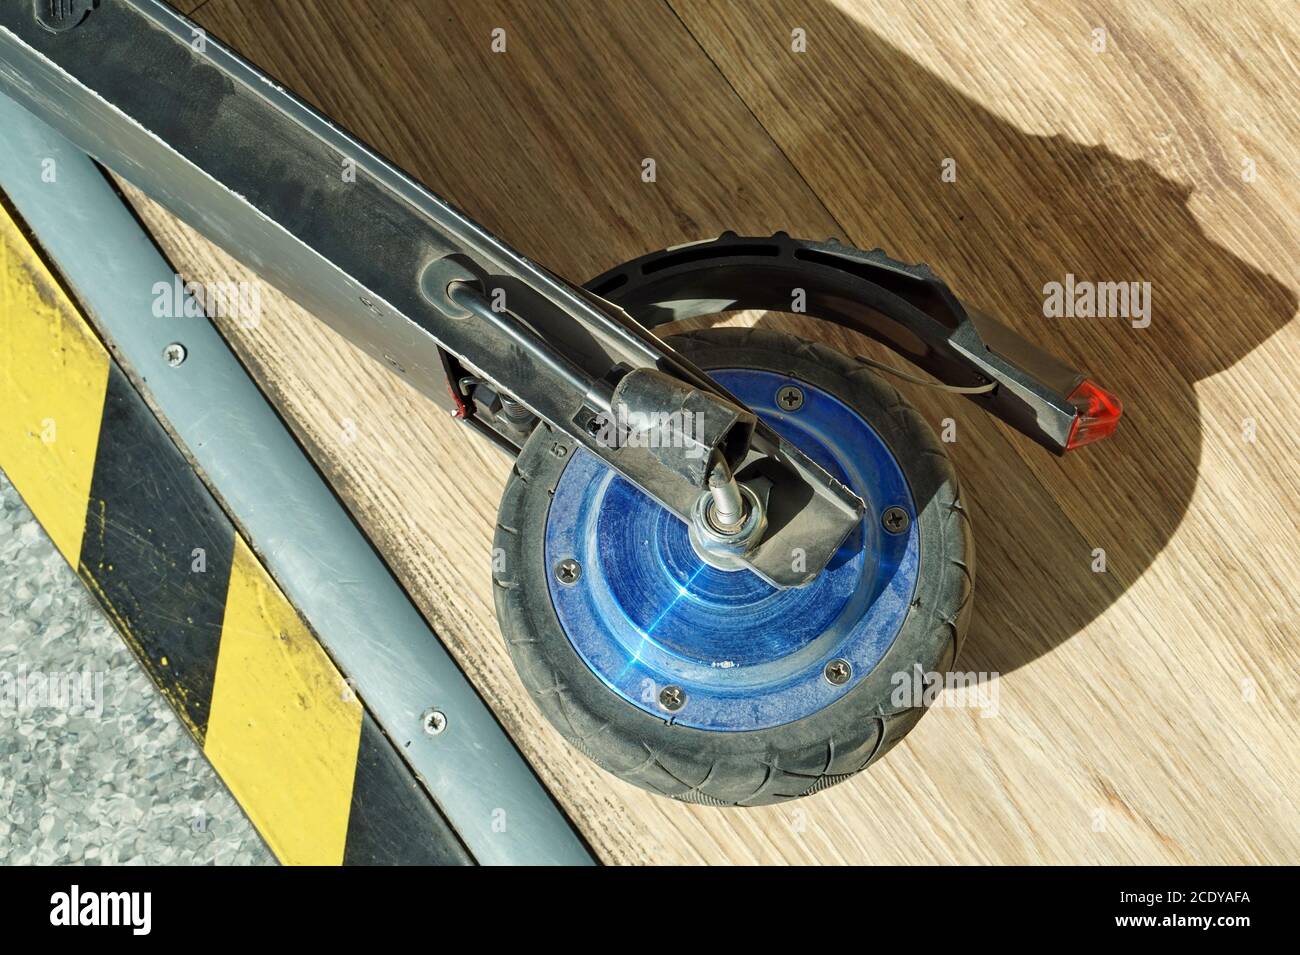 Broken wheel of a small modern electric scooter Stock Photo